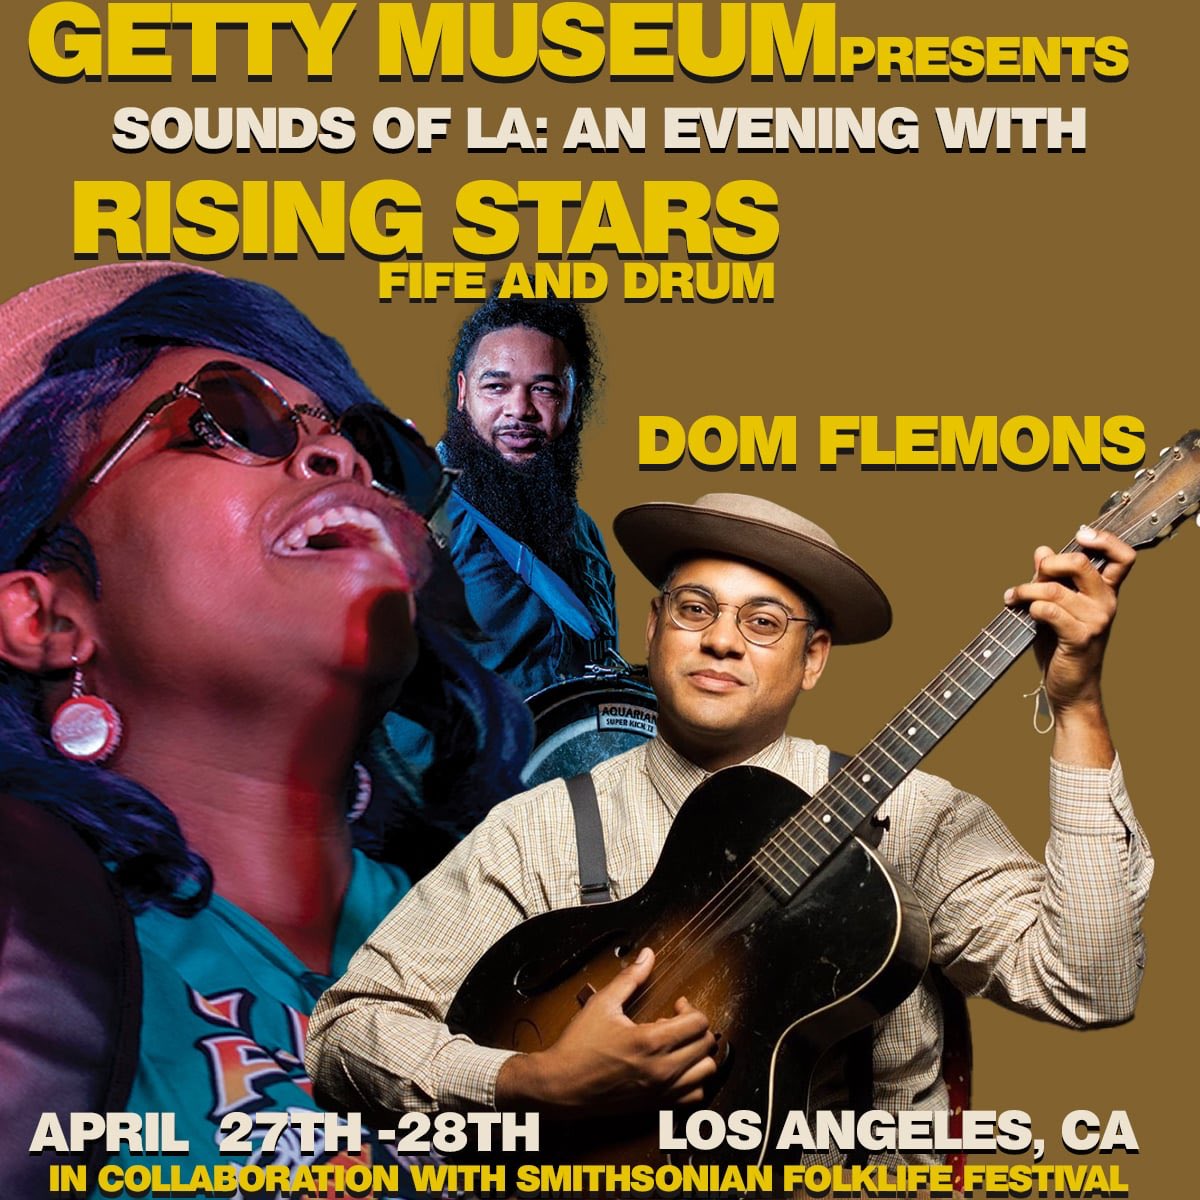 It’s great to be back in LA and I’m looking forward to the show tonight and tomorrow at The Getty with The Rising Stars!